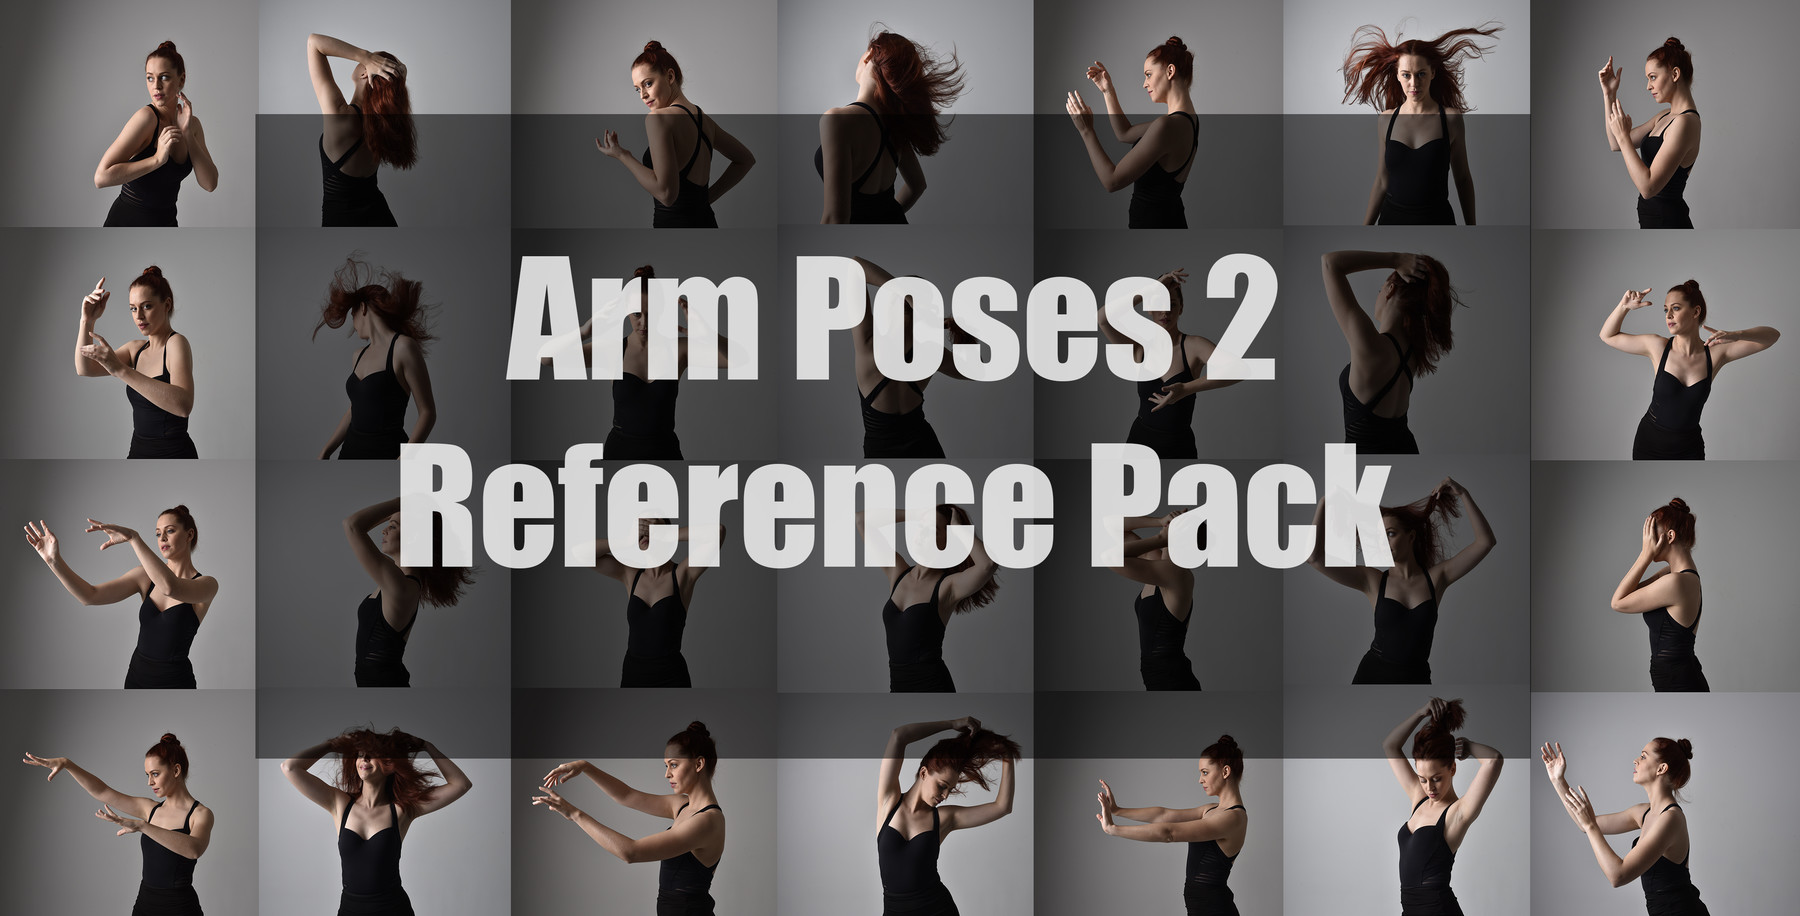 Arms Side 6 by PirateLotus-Stock on DeviantArt | Art reference poses, Body  reference drawing, Anatomy reference